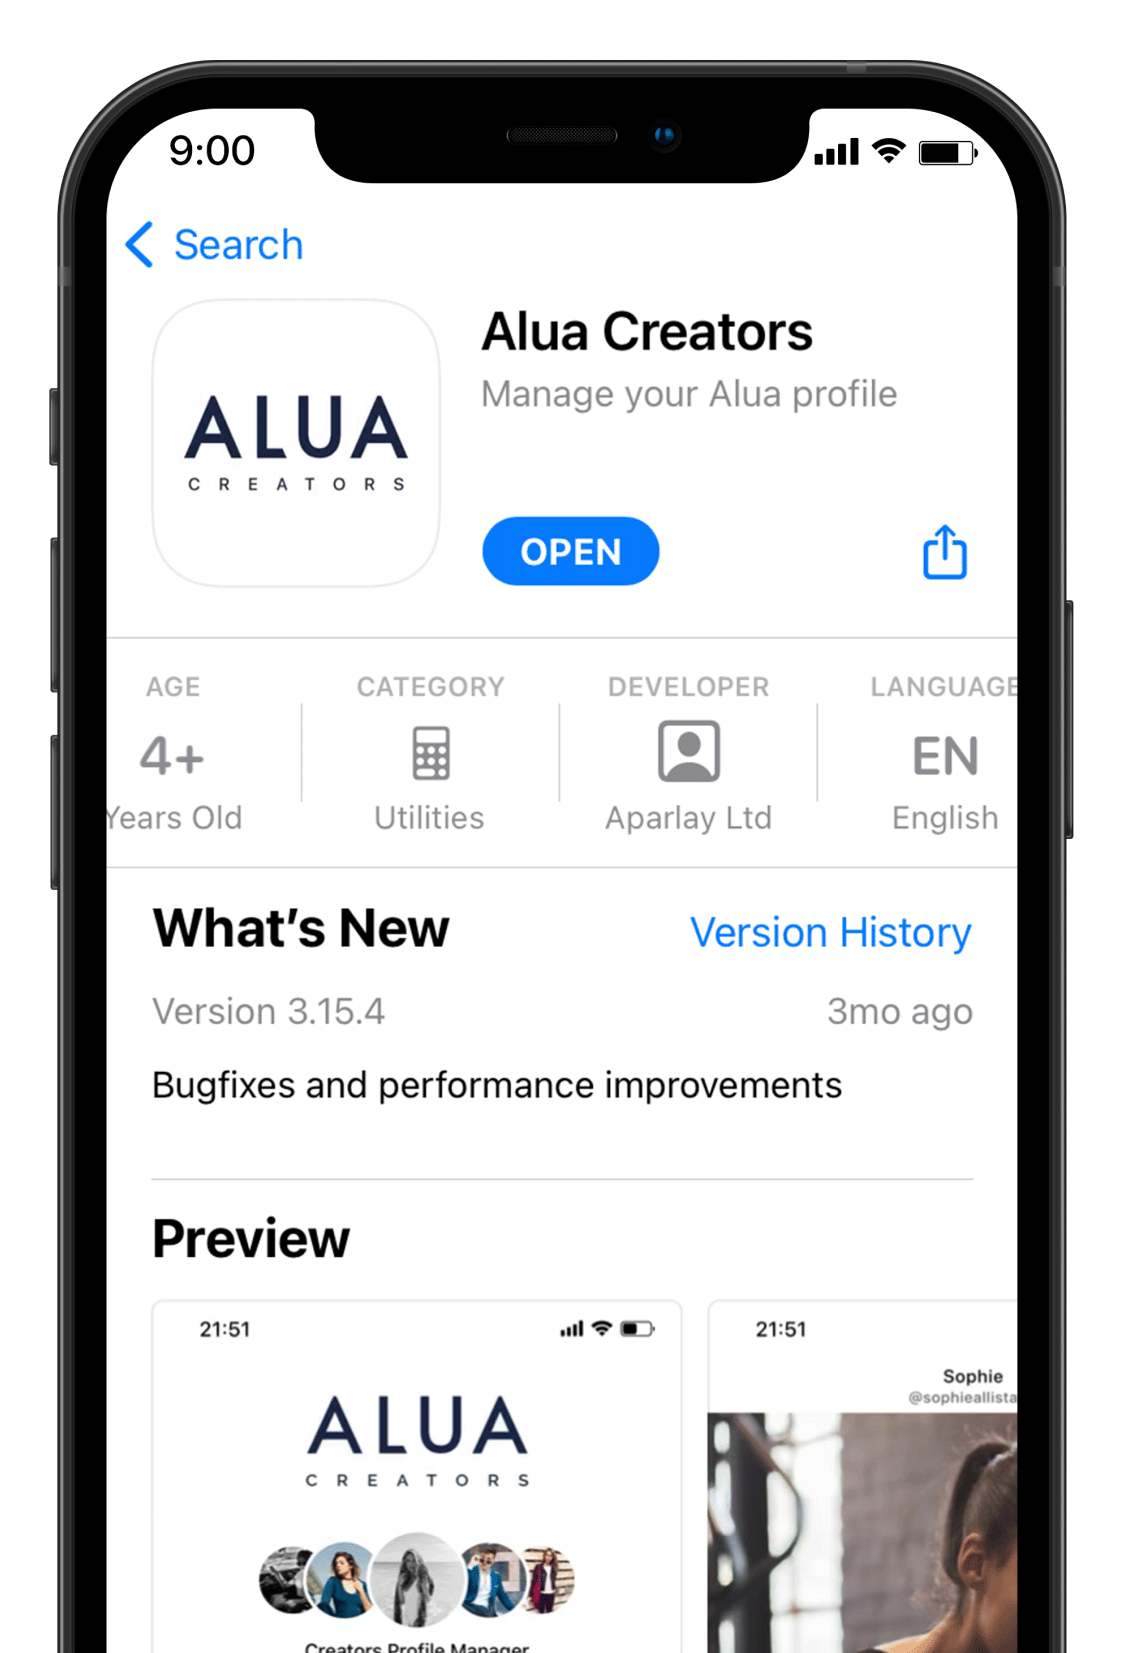 Download Alua Messenger on iOS to reach out to customers